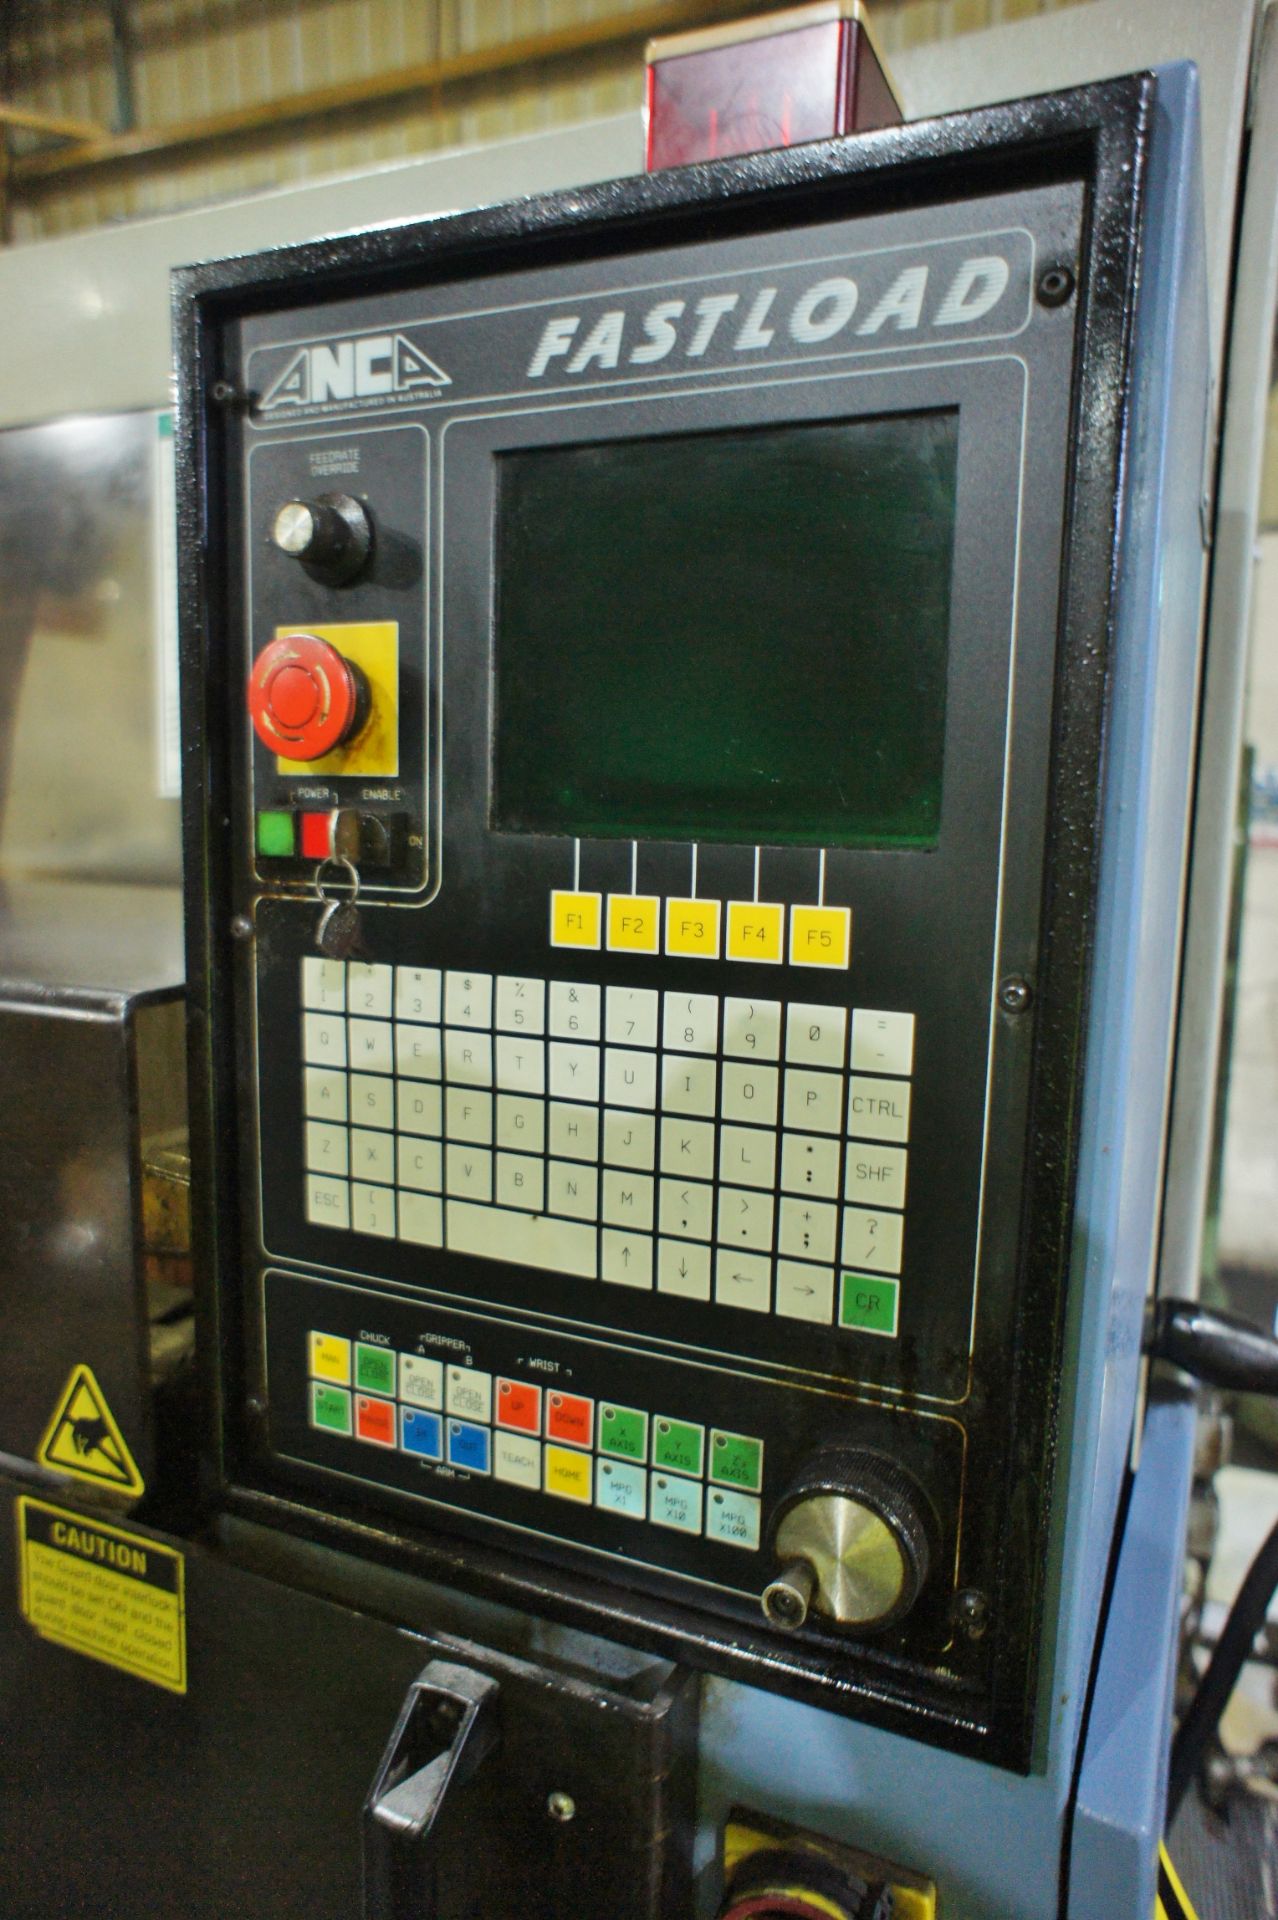 Anca Fast Grind SYS32 CNC M97 CNC tool grinder - Image 11 of 18